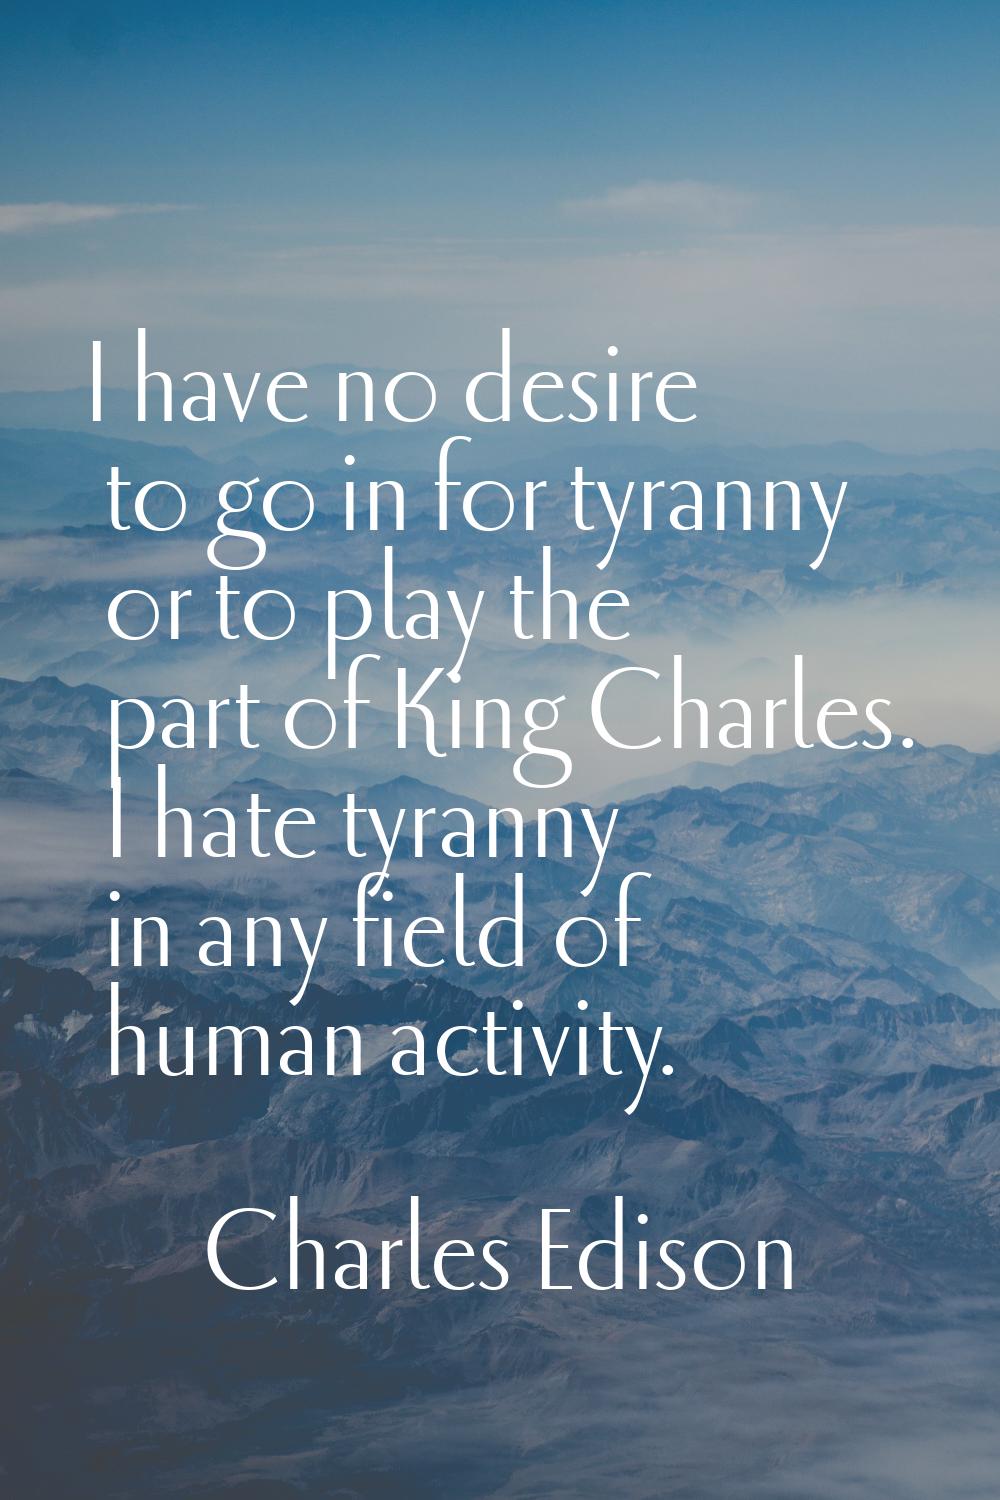 I have no desire to go in for tyranny or to play the part of King Charles. I hate tyranny in any fi